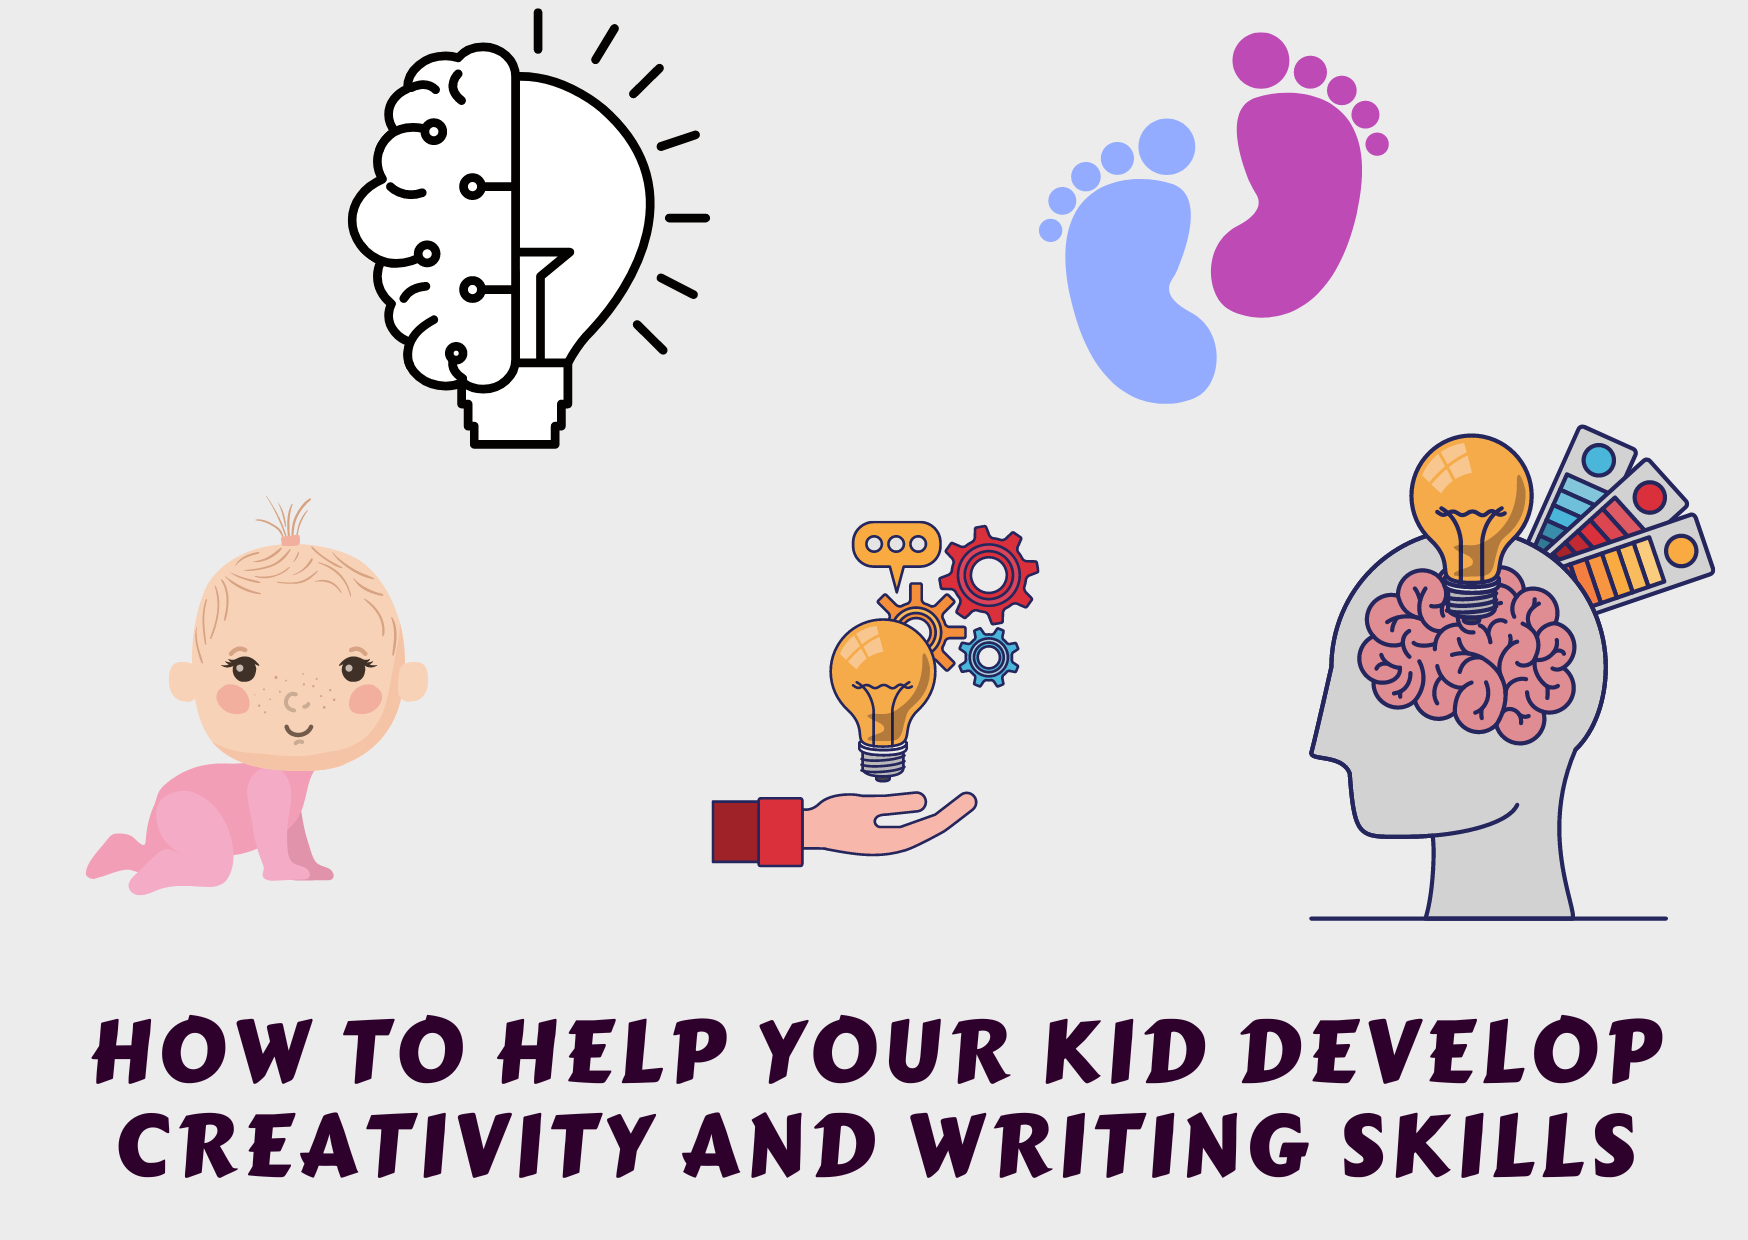 How to Help Your Kid Develop Creativity and Writing Skills